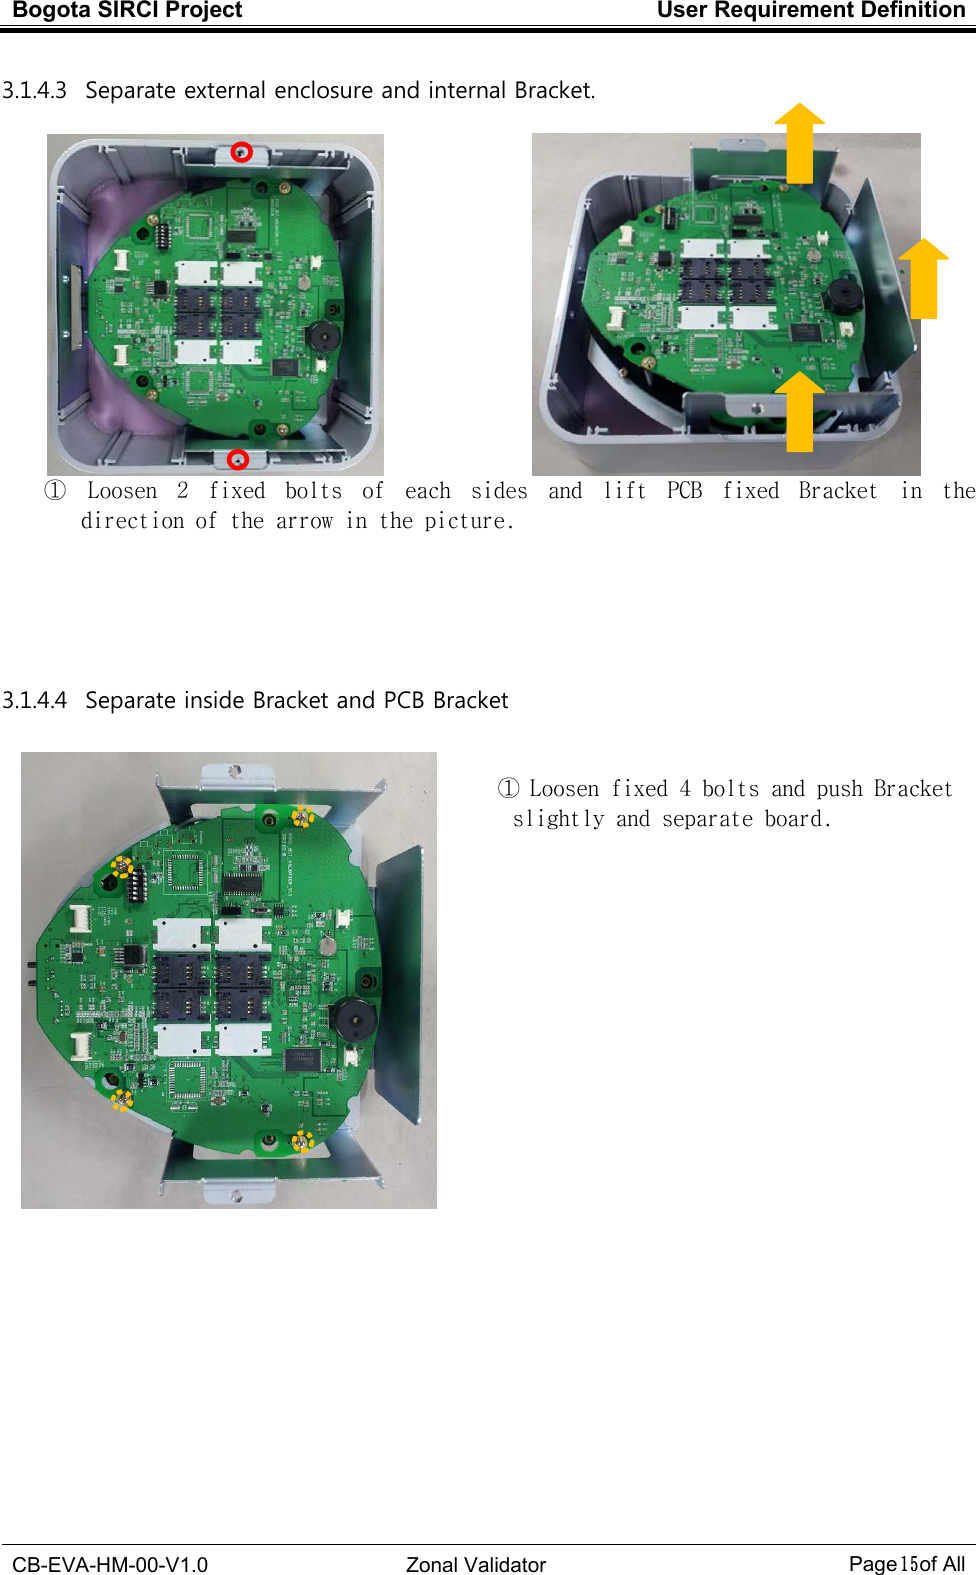 Bogota SIRCI Project  User Requirement Definition  CB-EVA-HM-00-V1.0  Zonal Validator Page１５１５１５１５ of All  3.1.4.3   Separate external enclosure and internal Bracket.                ①  Loosen  2  fixed  bolts  of  each  sides  and  lift  PCB  fixed  Bracket  in  the direction of the arrow in the picture.      3.1.4.4   Separate inside Bracket and PCB Bracket   ① Loosen fixed 4 bolts and push Bracket   slightly and separate board.                